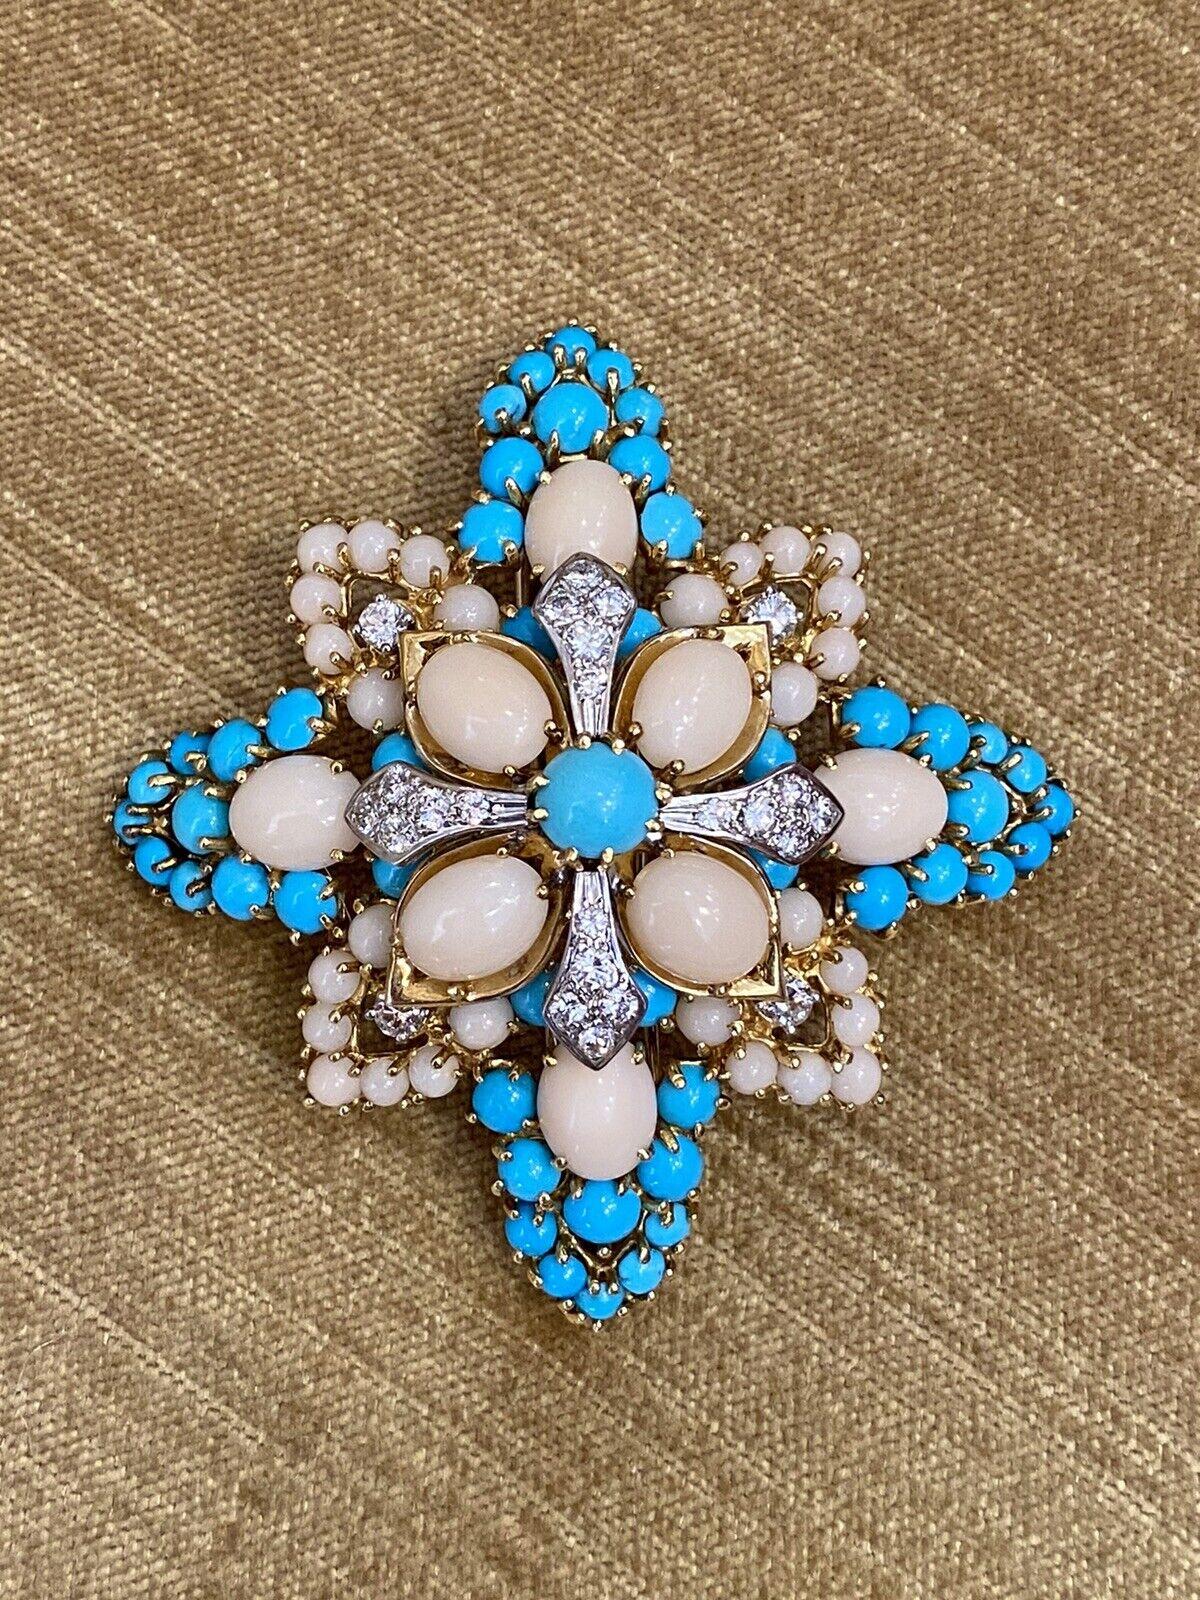 Cabochon Angel Skin Coral & Turquoise Maltese Cross Pin Brooch 18k Yellow Gold For Sale